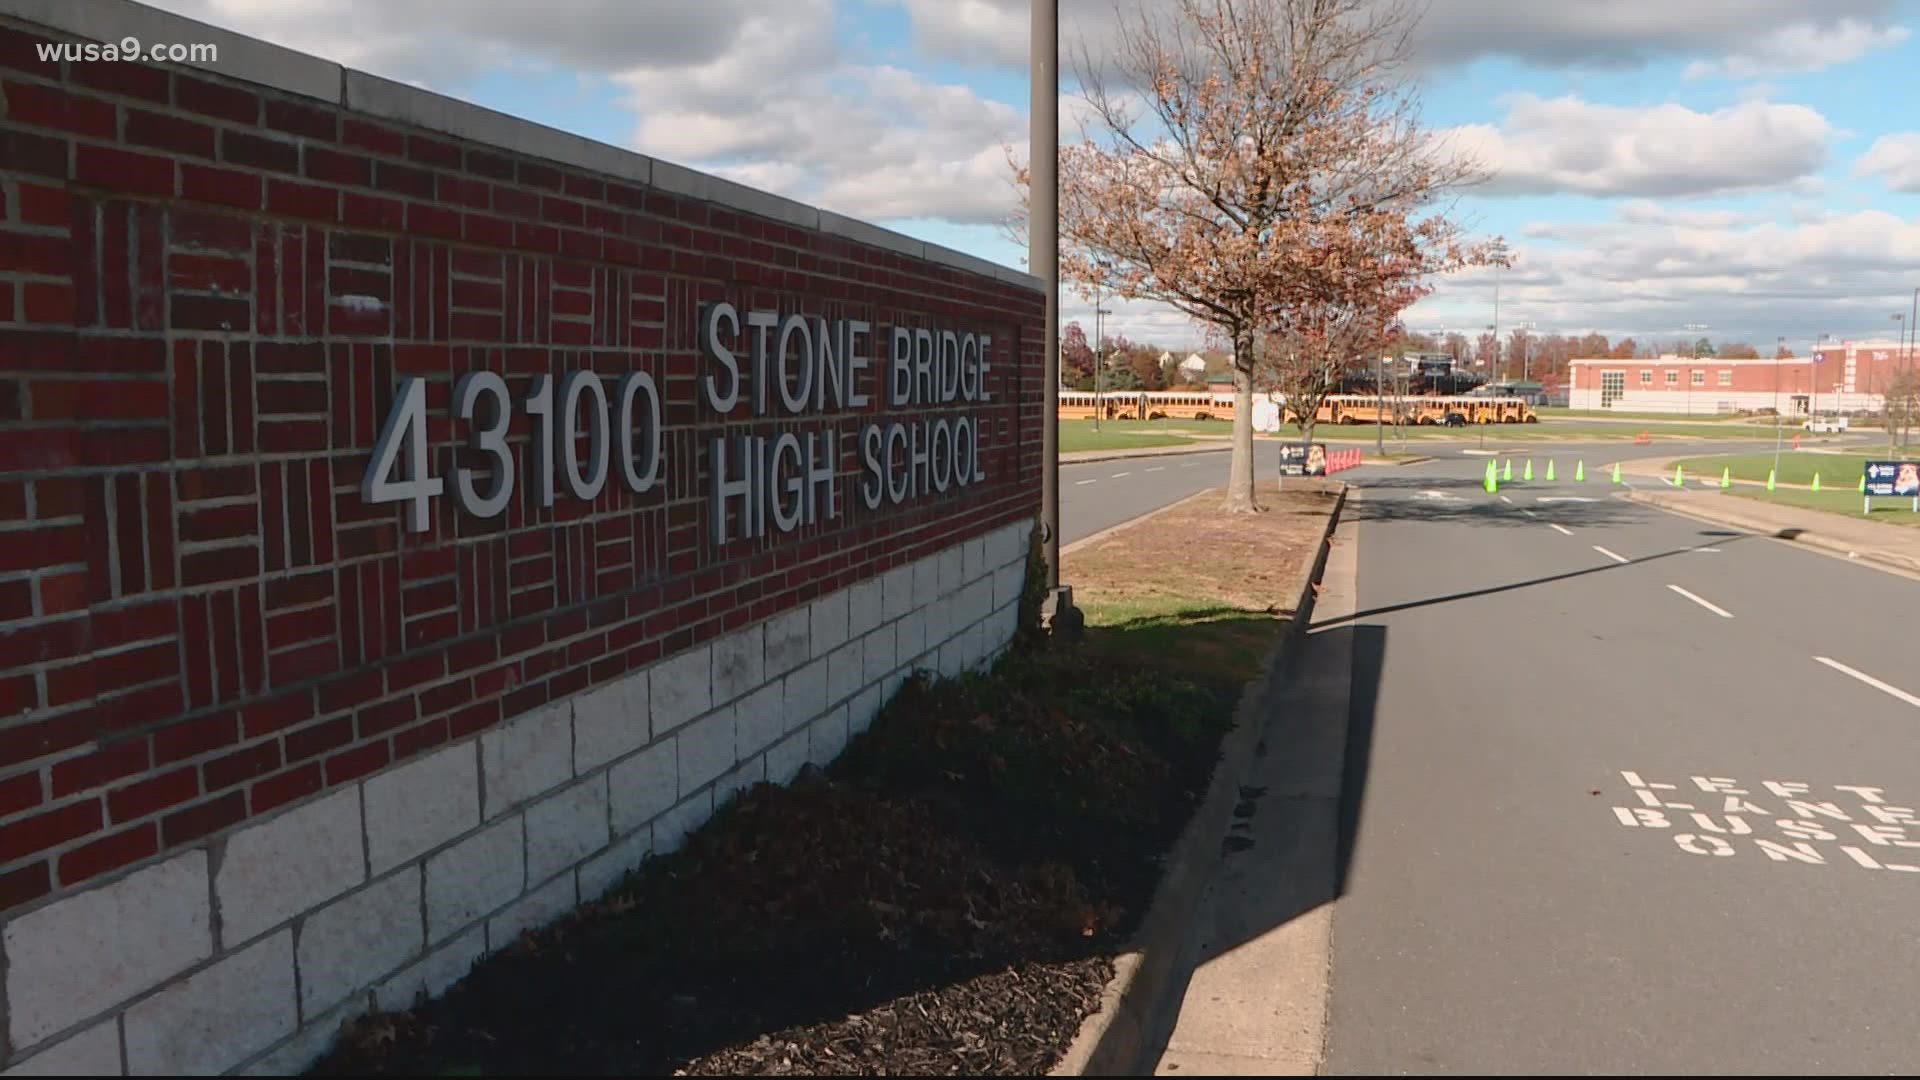 The 15-year-old boy had been transferred to a second school after allegedly sodomizing a student in the girls' bathroom at Stone Bridge High School.